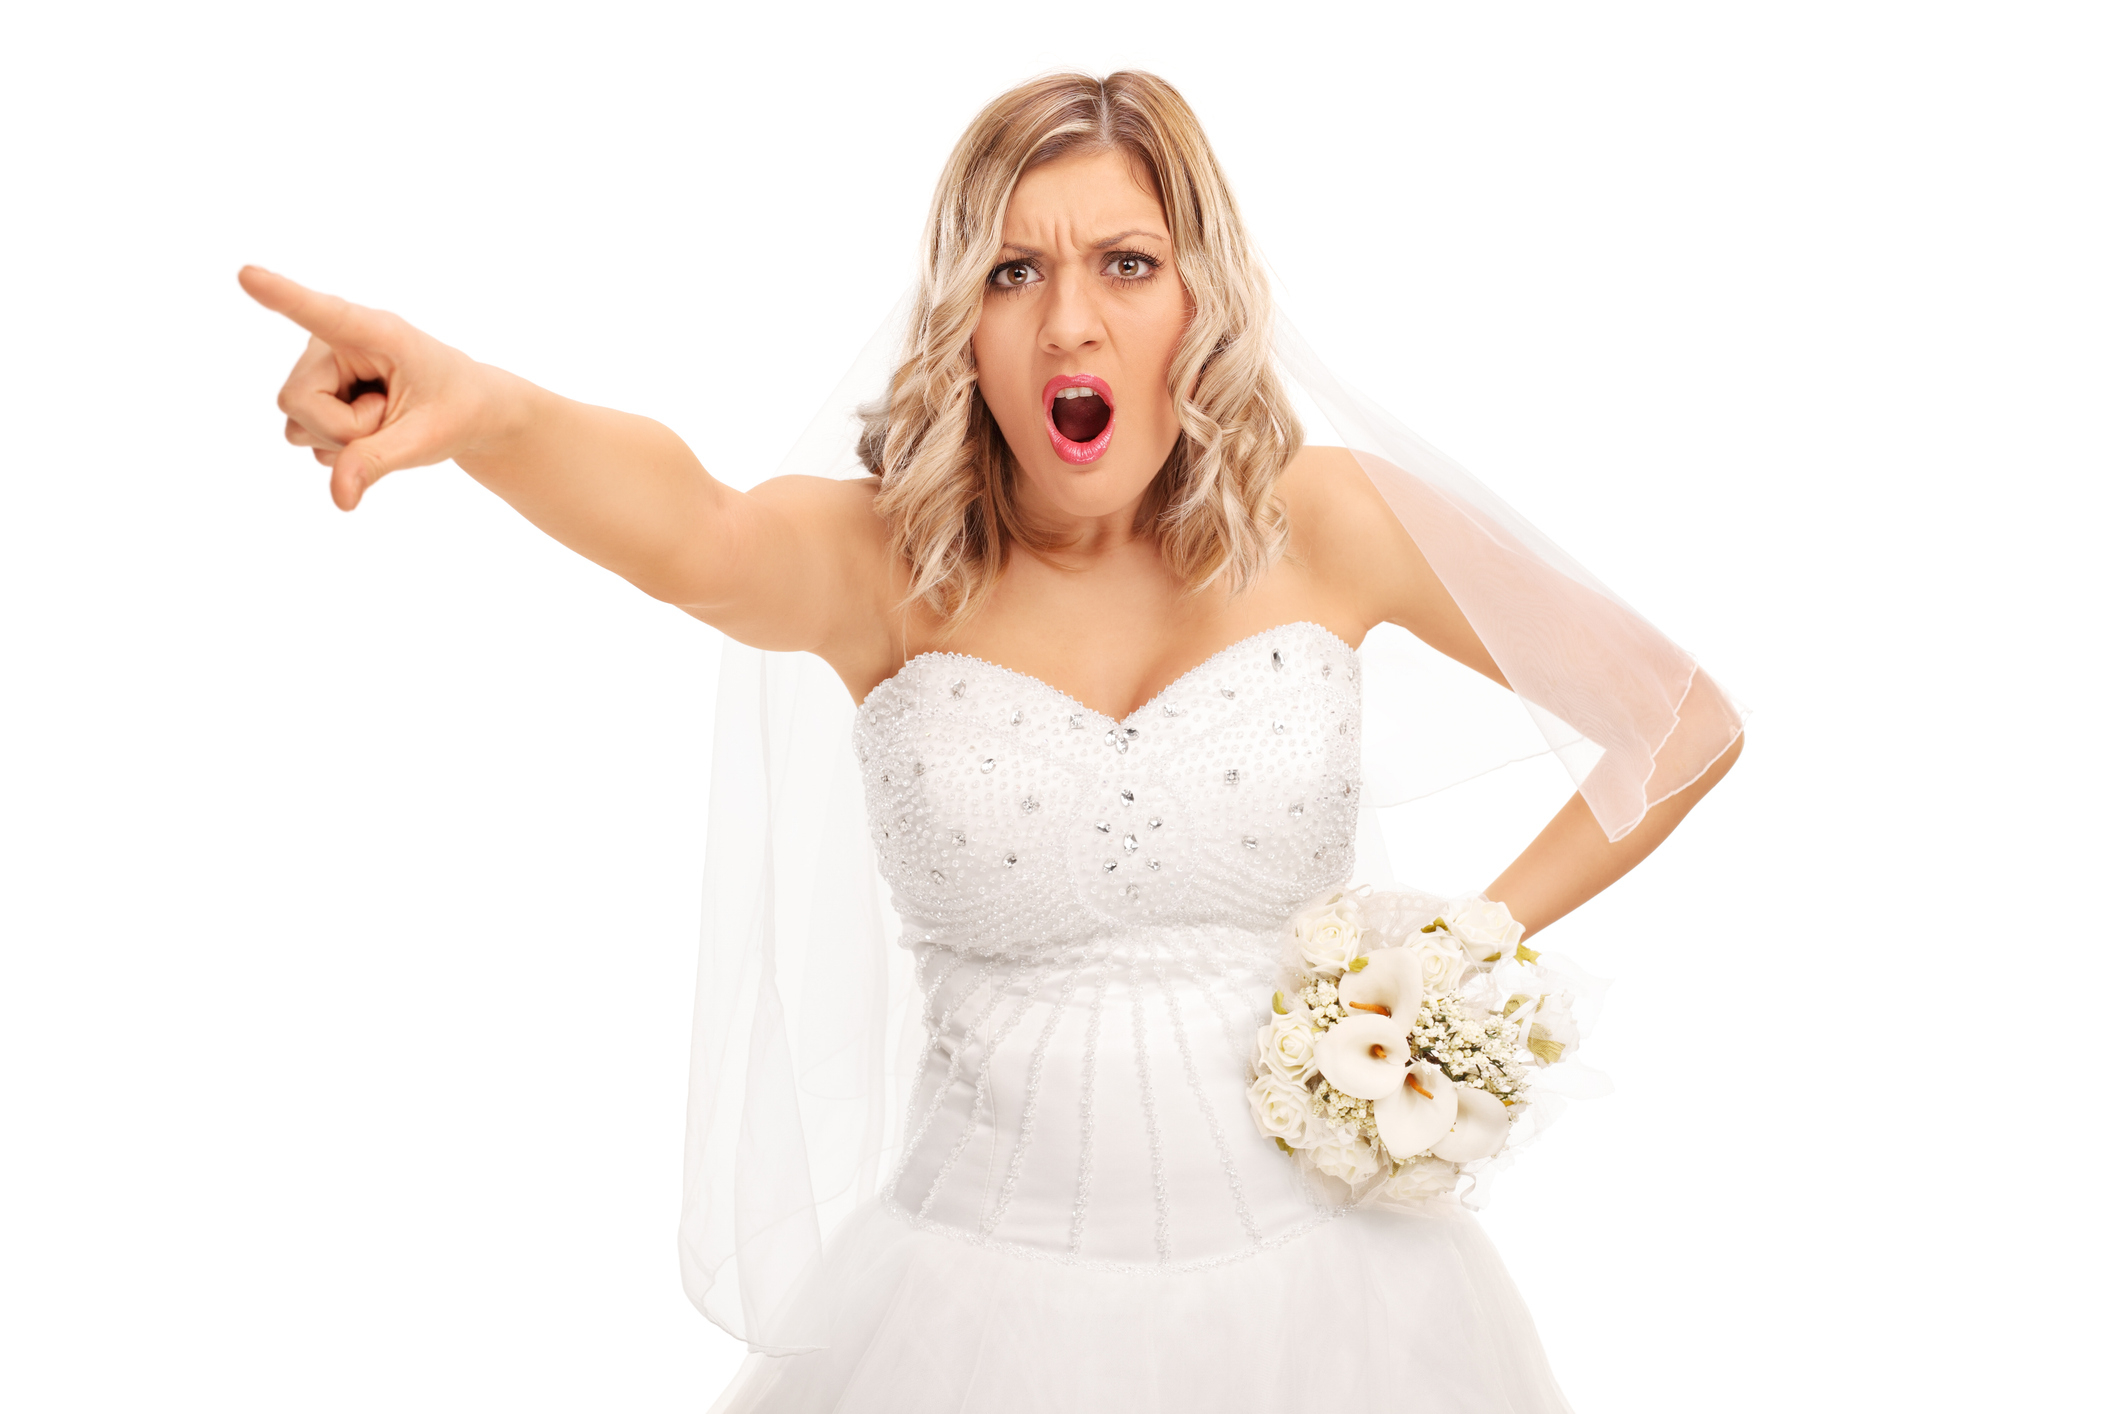 Bride in a strapless wedding dress pointing and shouting, expression of surprise or urgency, holding a bouquet